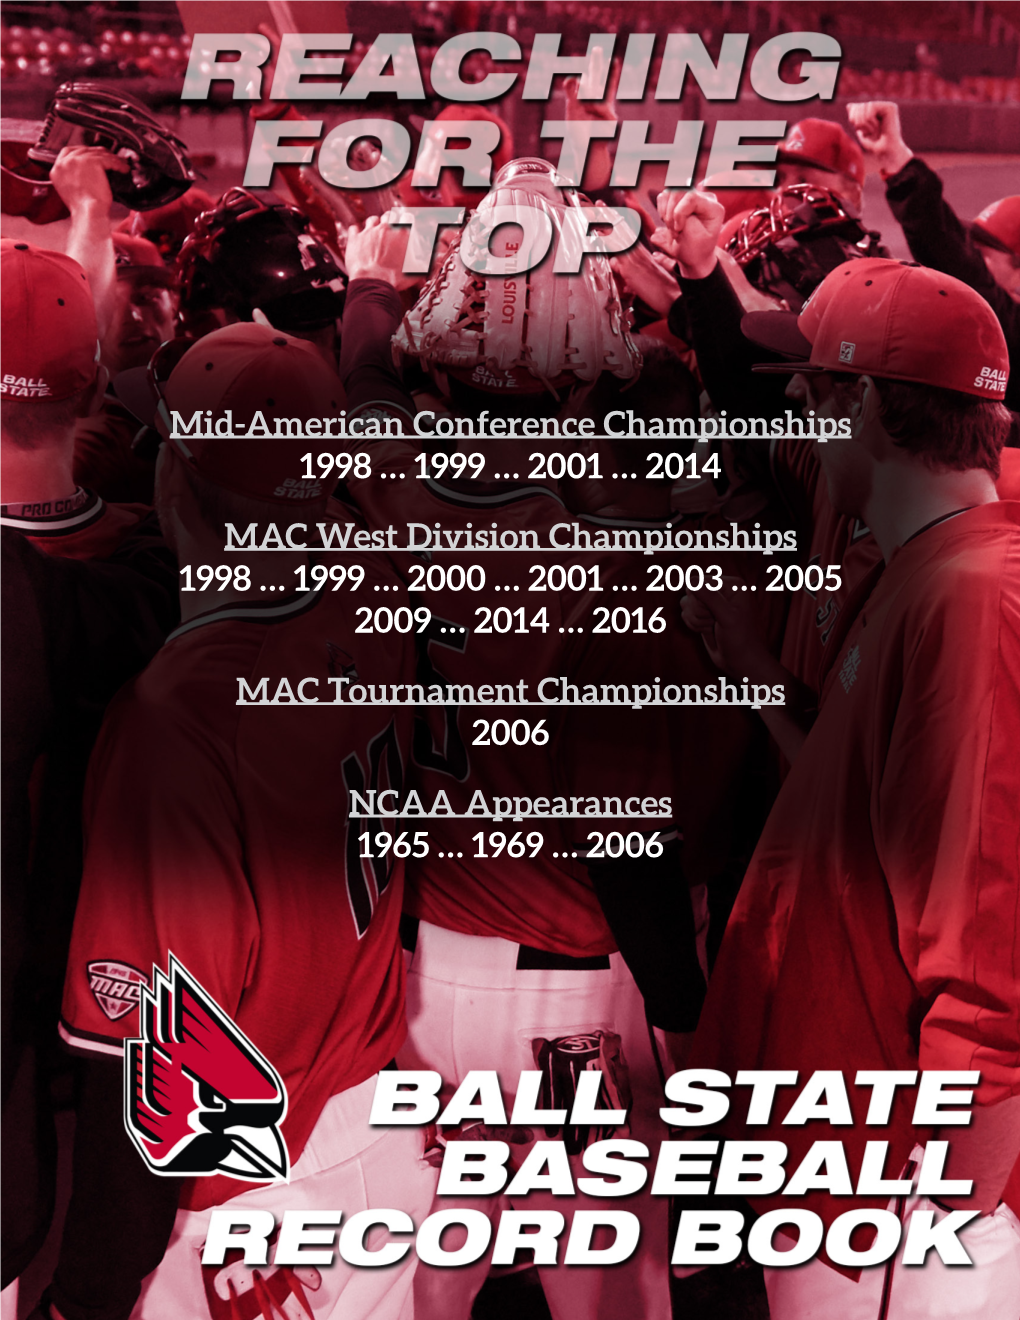 Mid-American Conference Championships 1998 … 1999 … 2001 … 2014